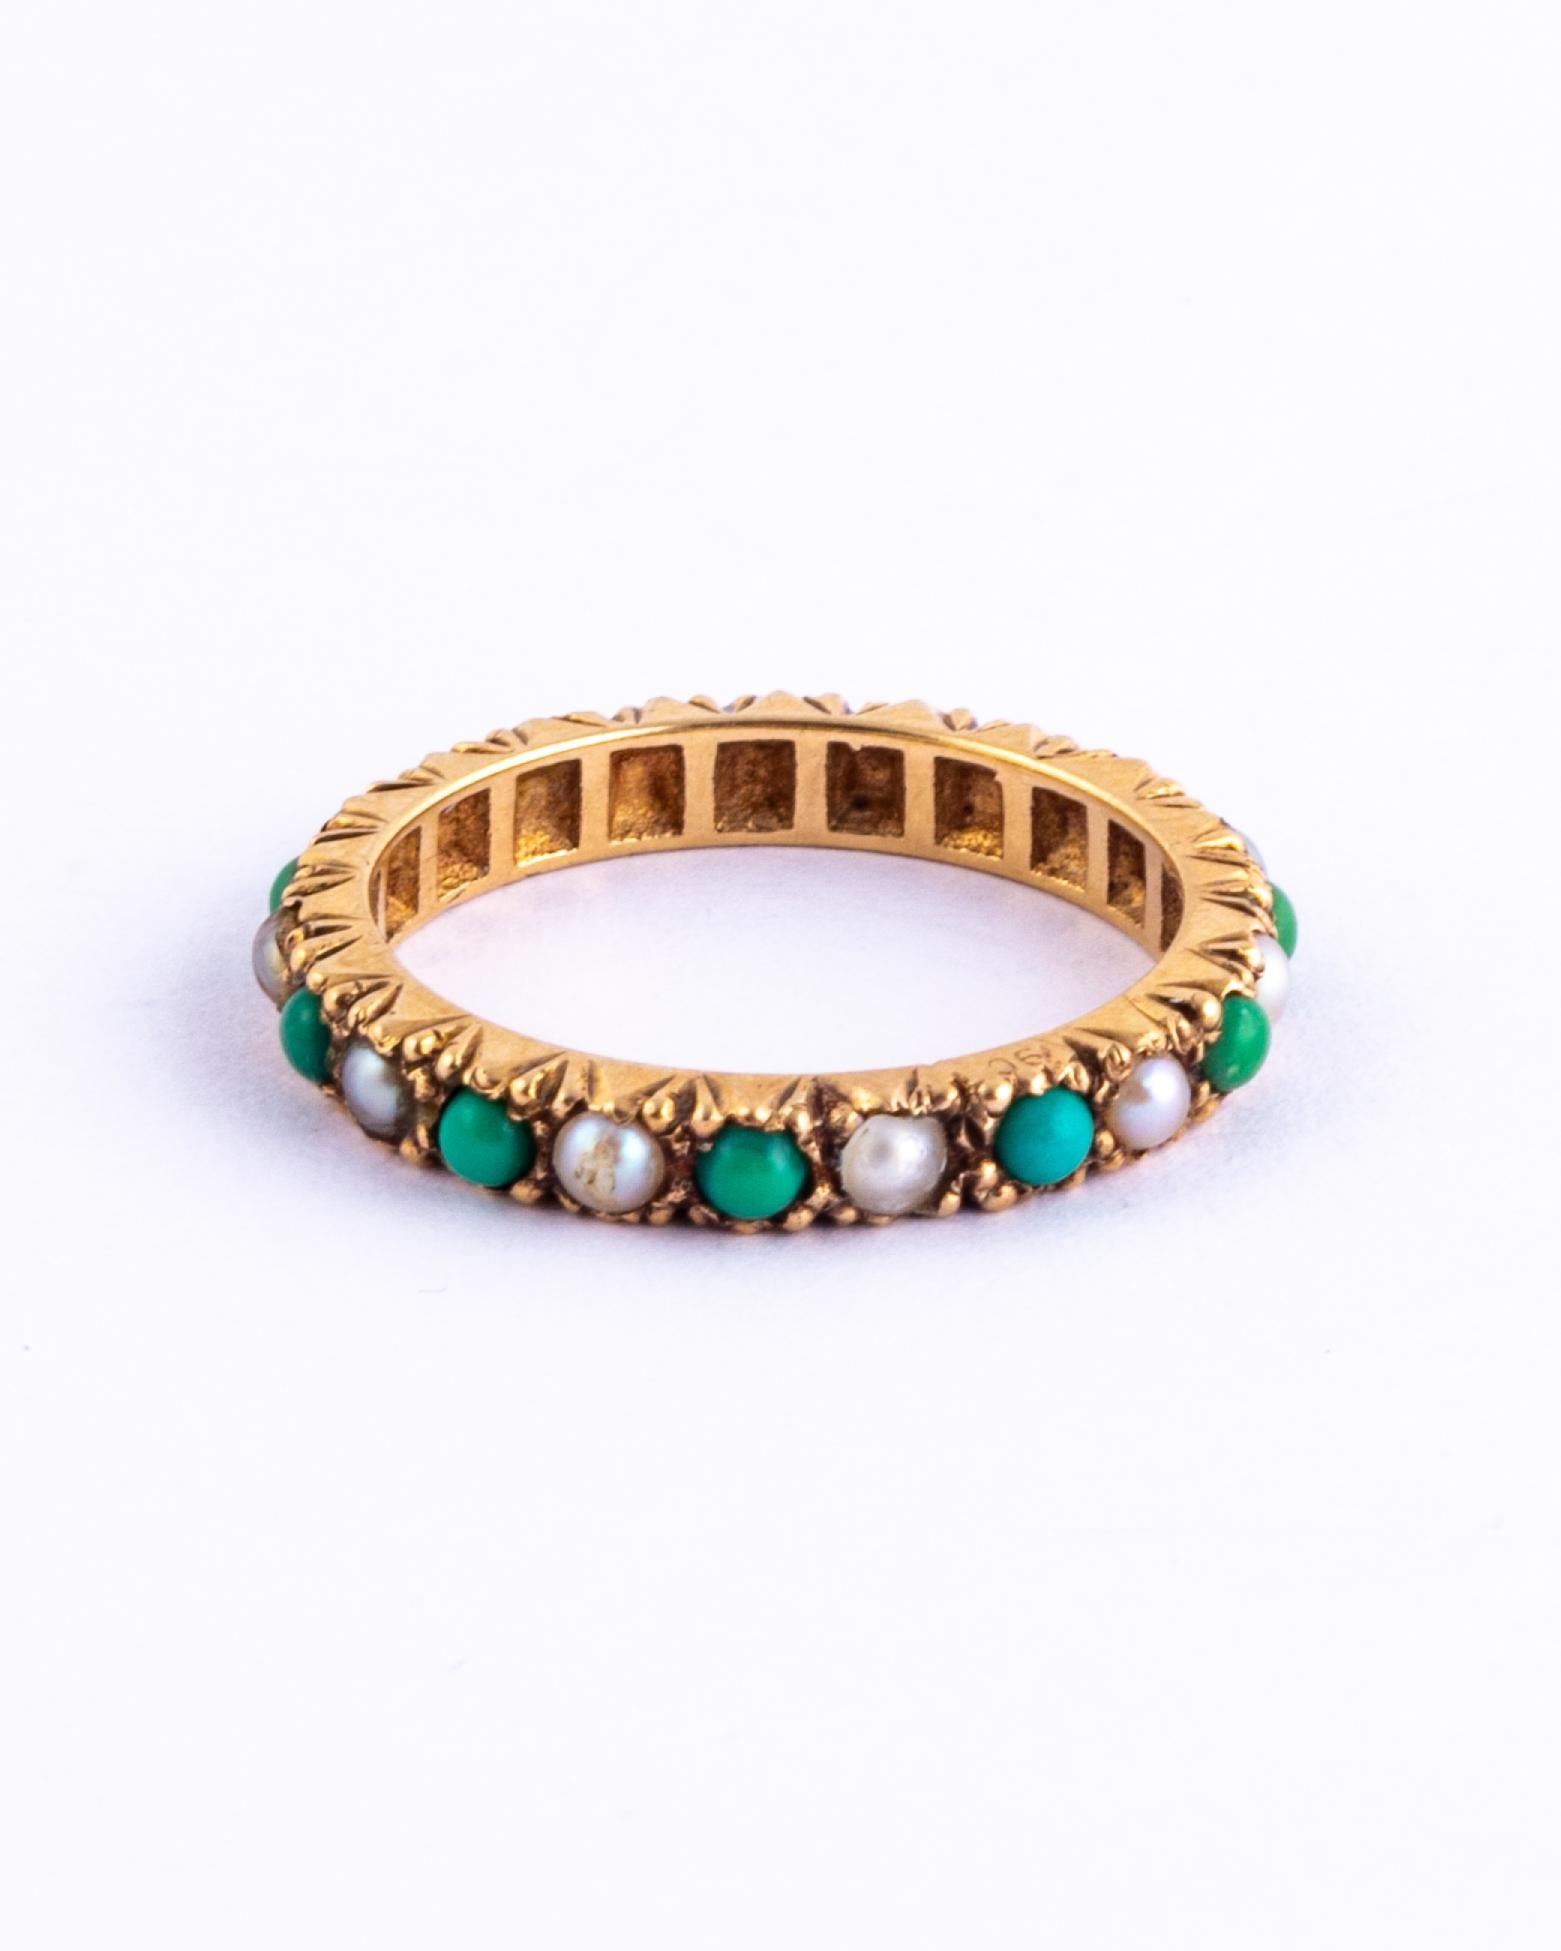 Cabochon Edwardian Pearl and Turquoise 9 Carat Gold Eternity Band